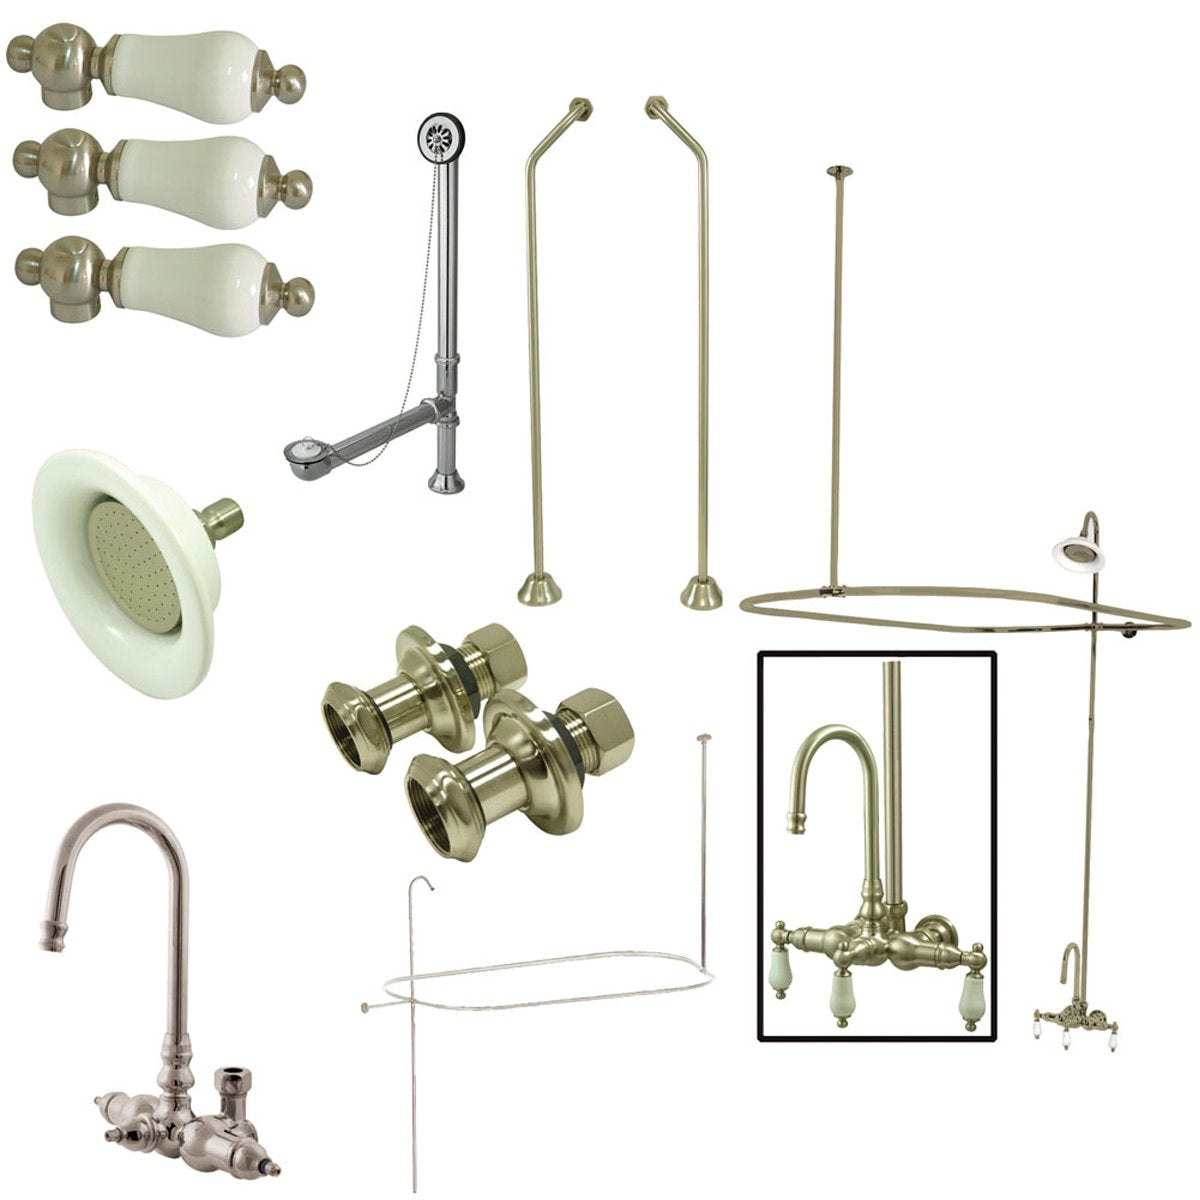 Kingston Brass Vintage Wall Mount Gooseneck Clawfoot Tub Faucet Package-Tub Faucets-Free Shipping-Directsinks.